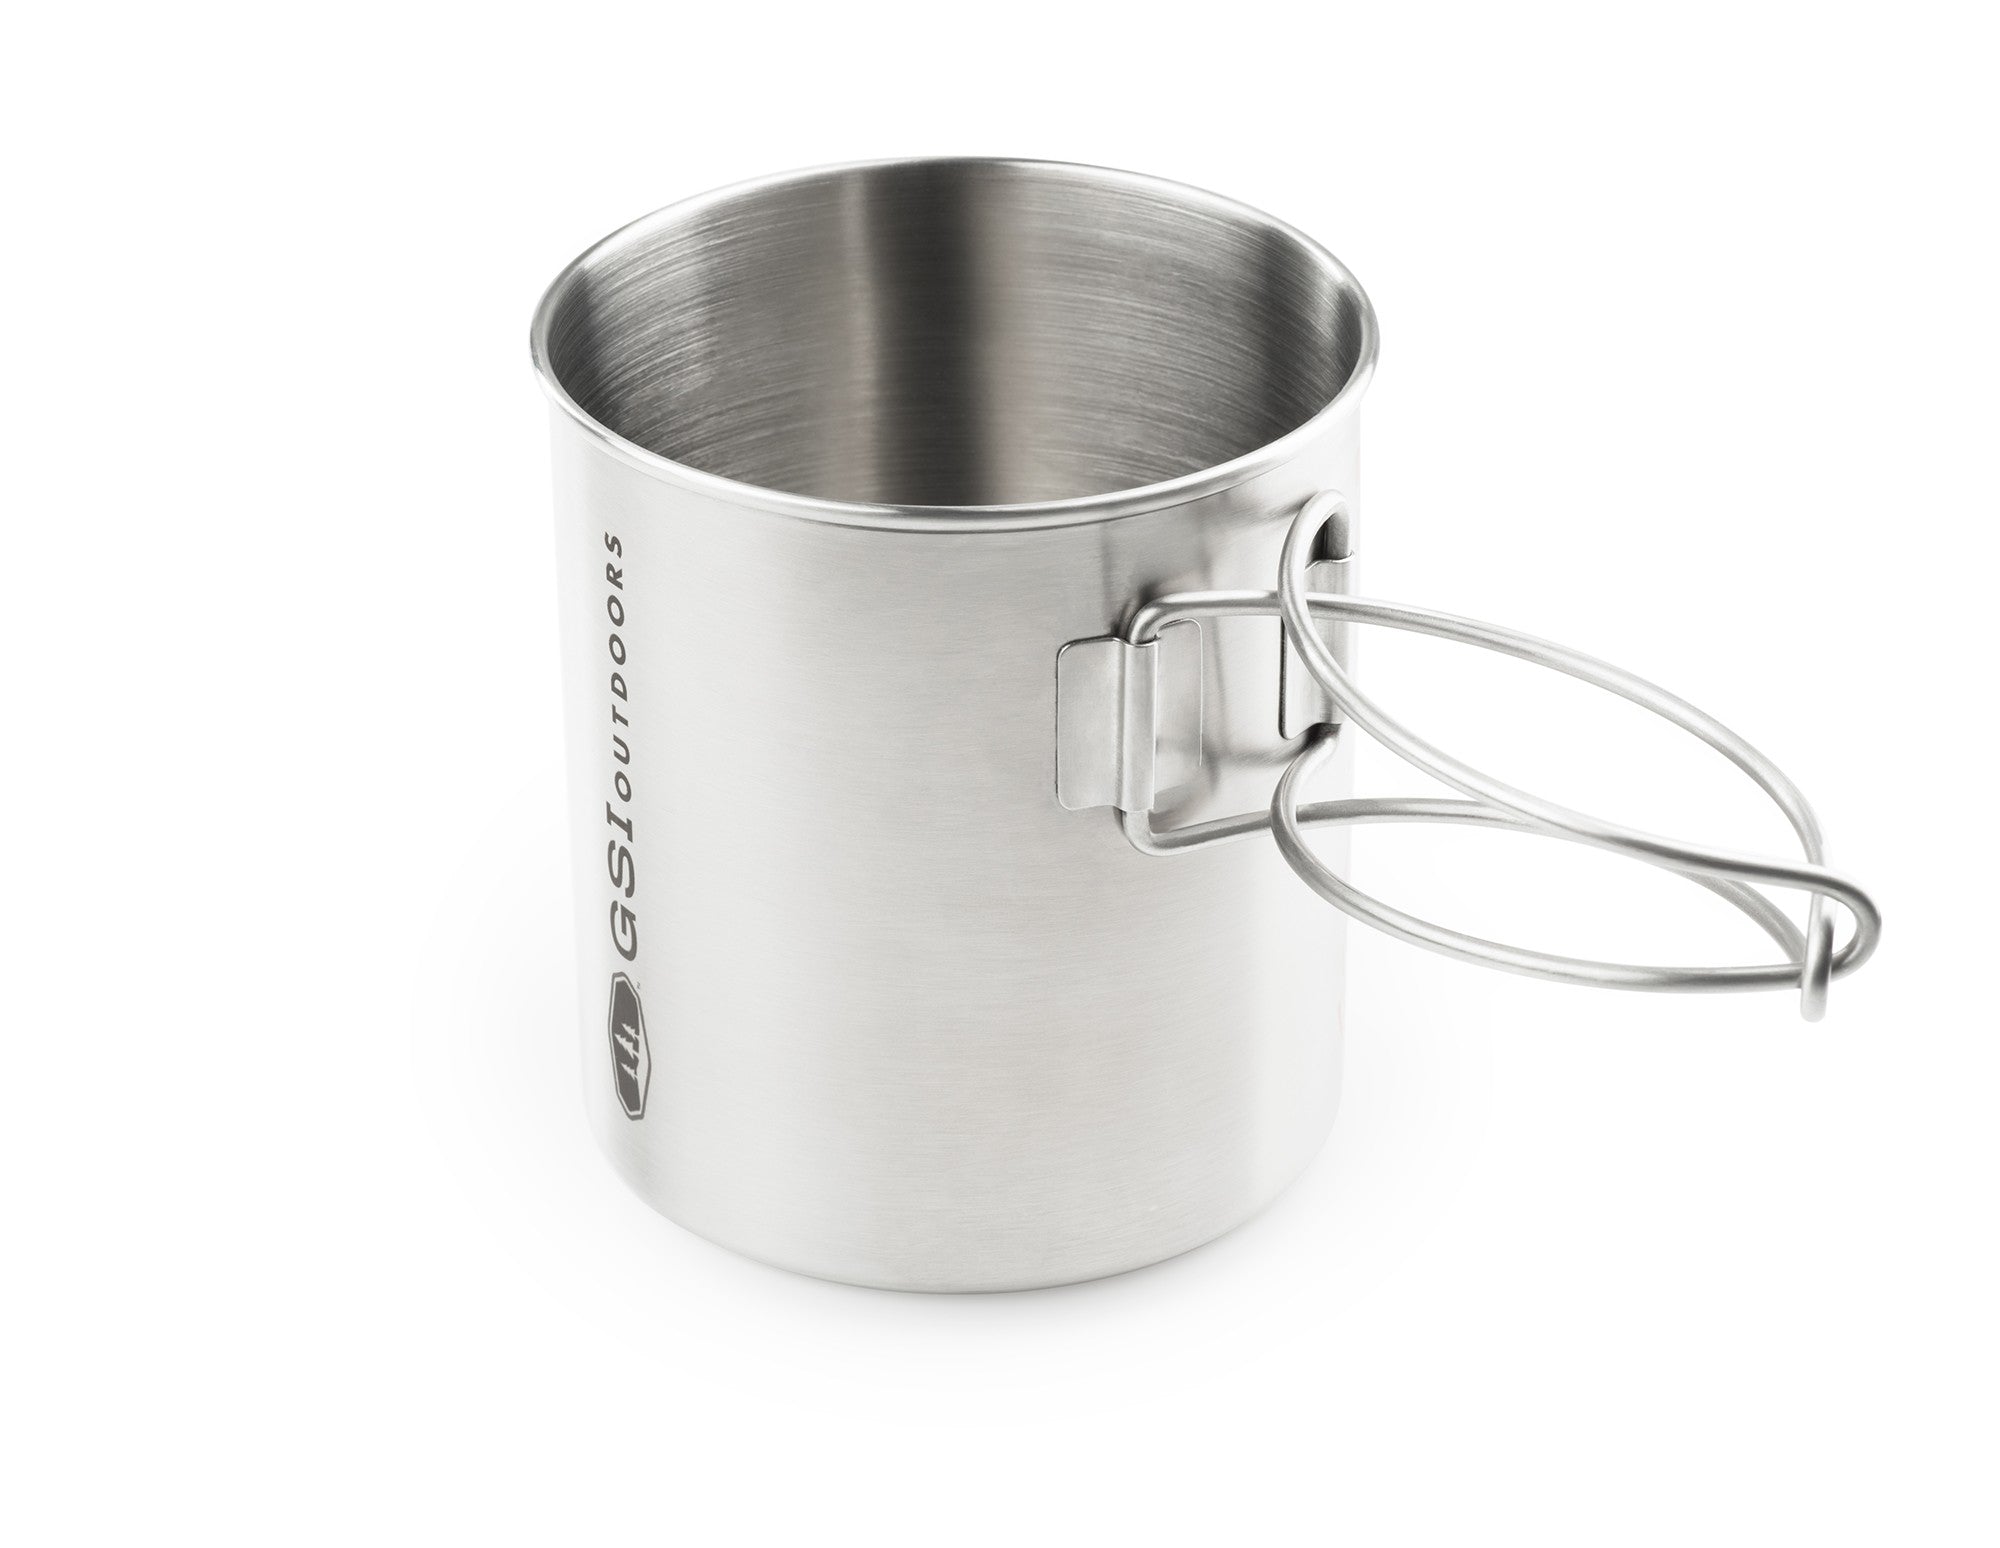 Glacier Stainless Backpacking Cup | GSI Outdoors